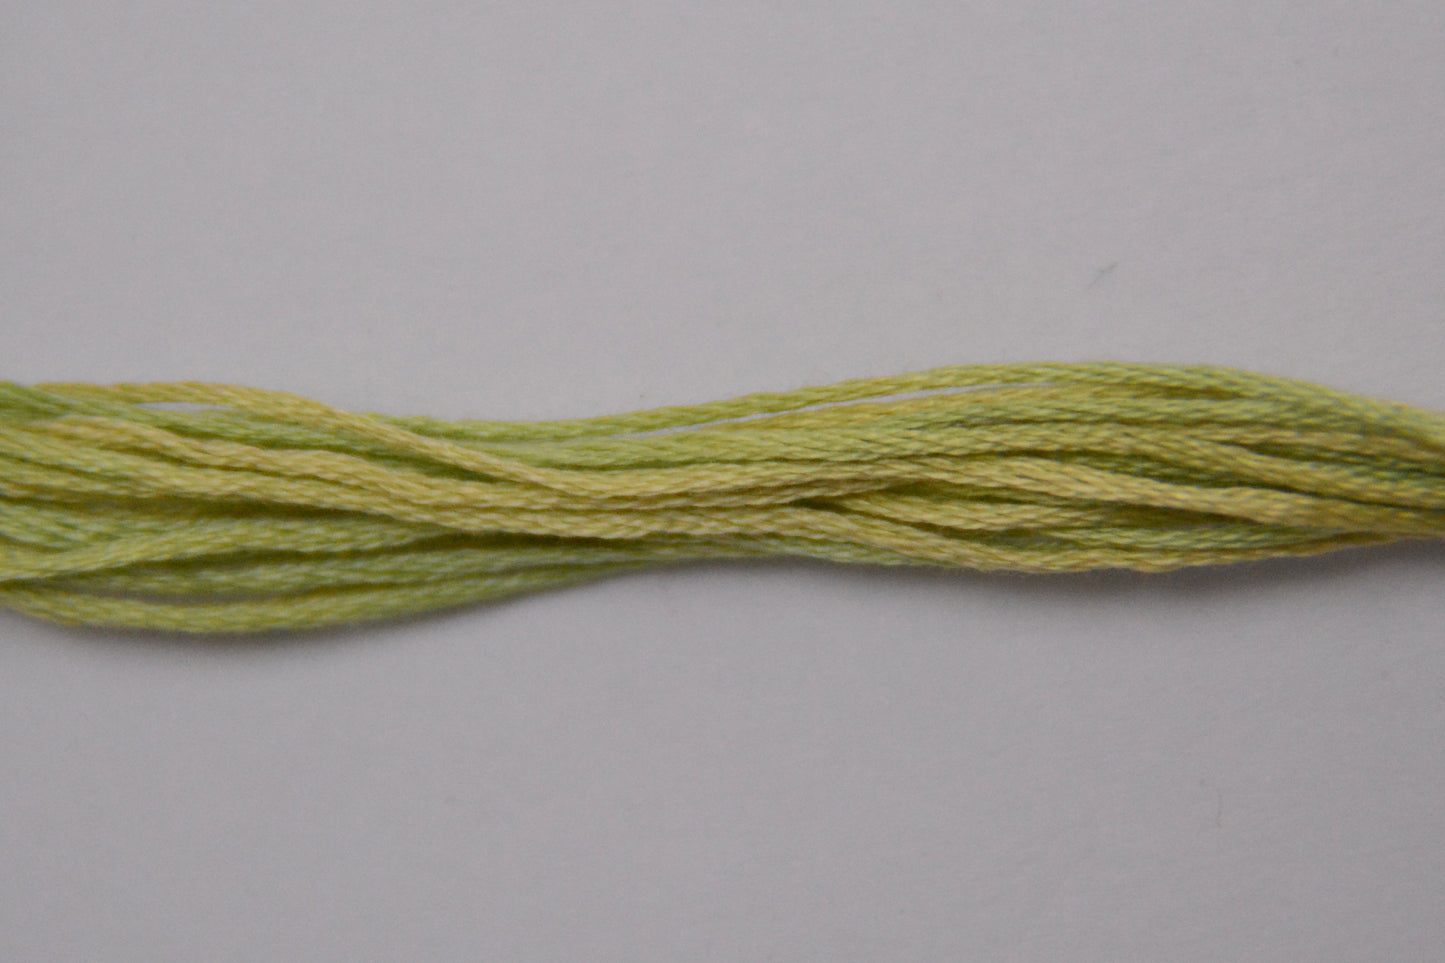 Butter Bean 1189 Weeks Dye Works 6-Strand Hand-Dyed Embroidery Floss